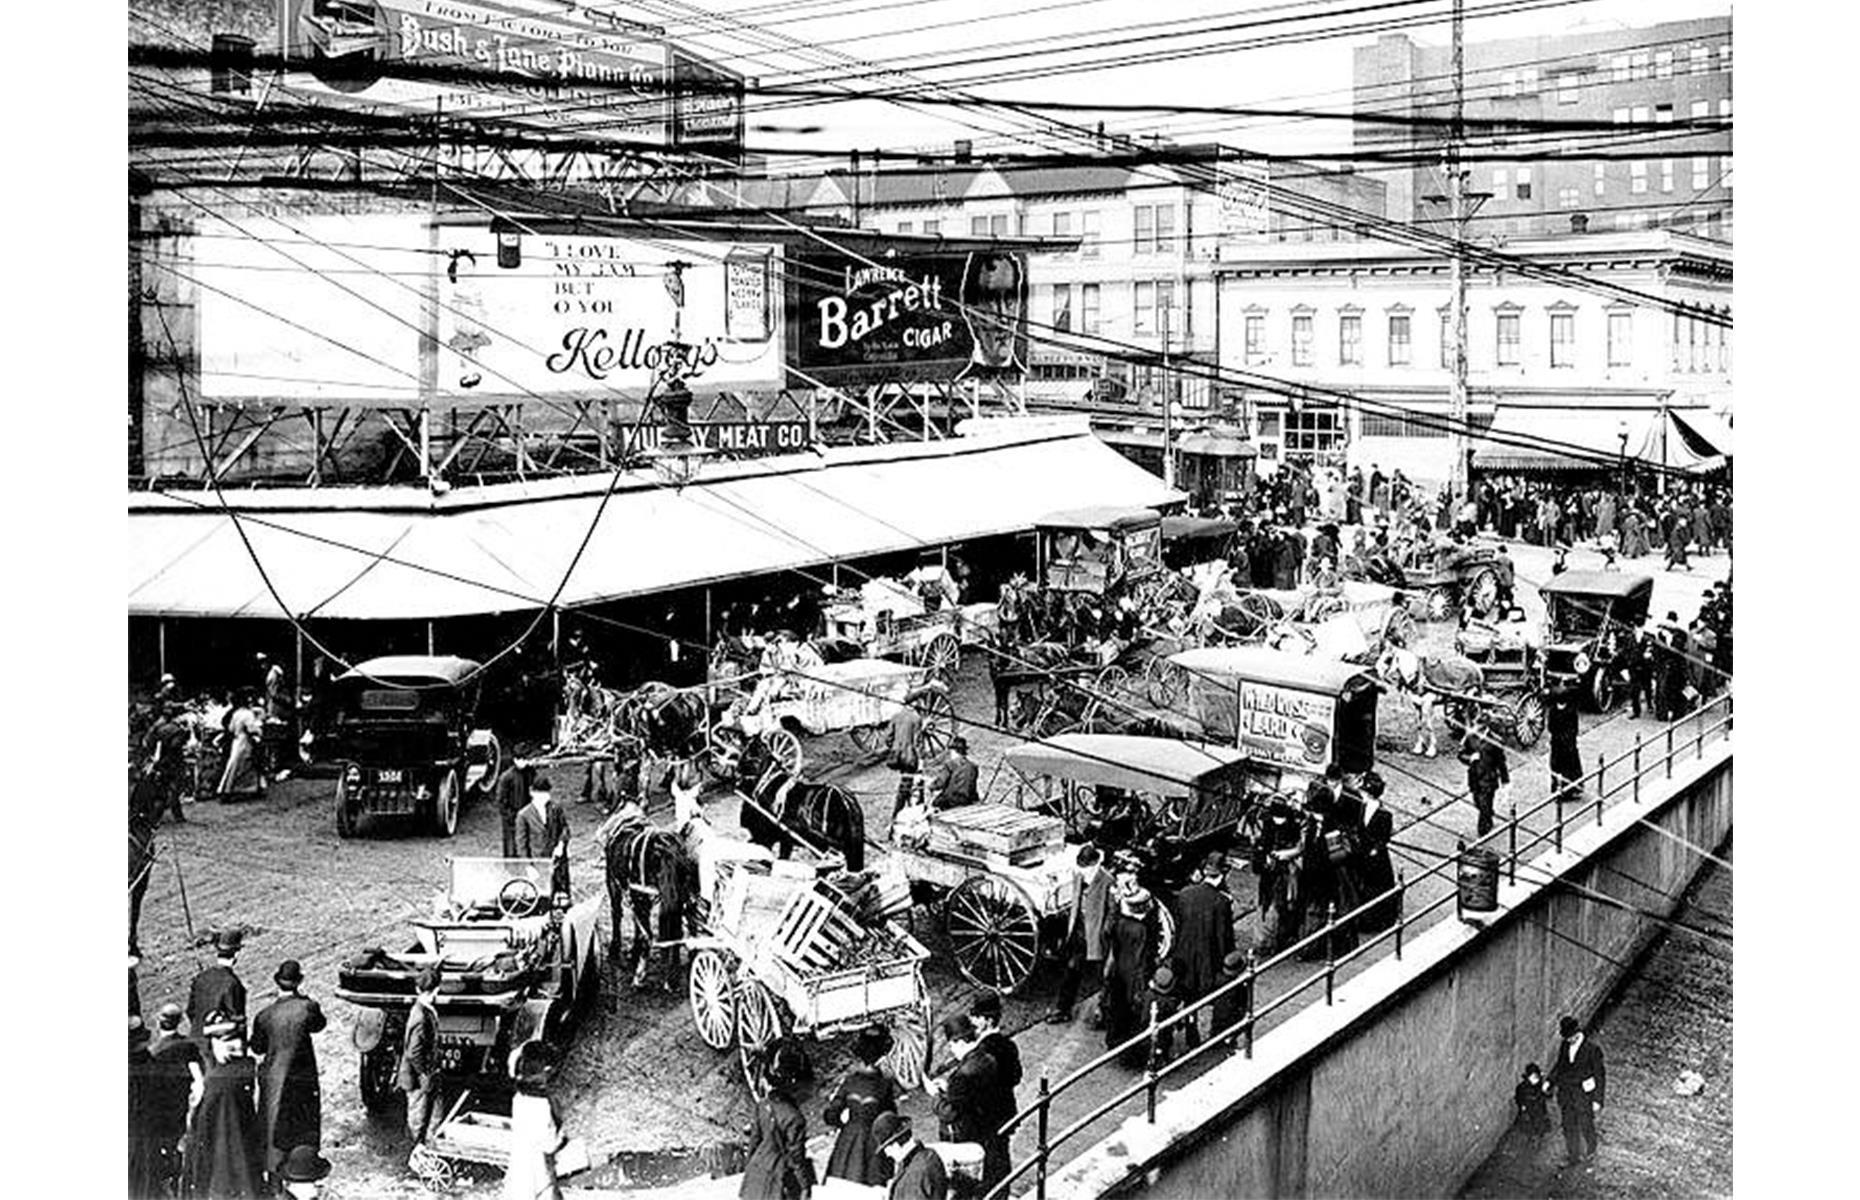 Seattle’s iconic Pike Place Market was created in 1907 to meet the city’s demand for fresh food, by inviting farmers to bring their wagons and sell it directly. Pictured here in 1910, the market is a far cry from the tourist-thronged site of today, where craft stalls, indie boutiques and hip foodie spots sit alongside the traditional fruit and veg stalls.